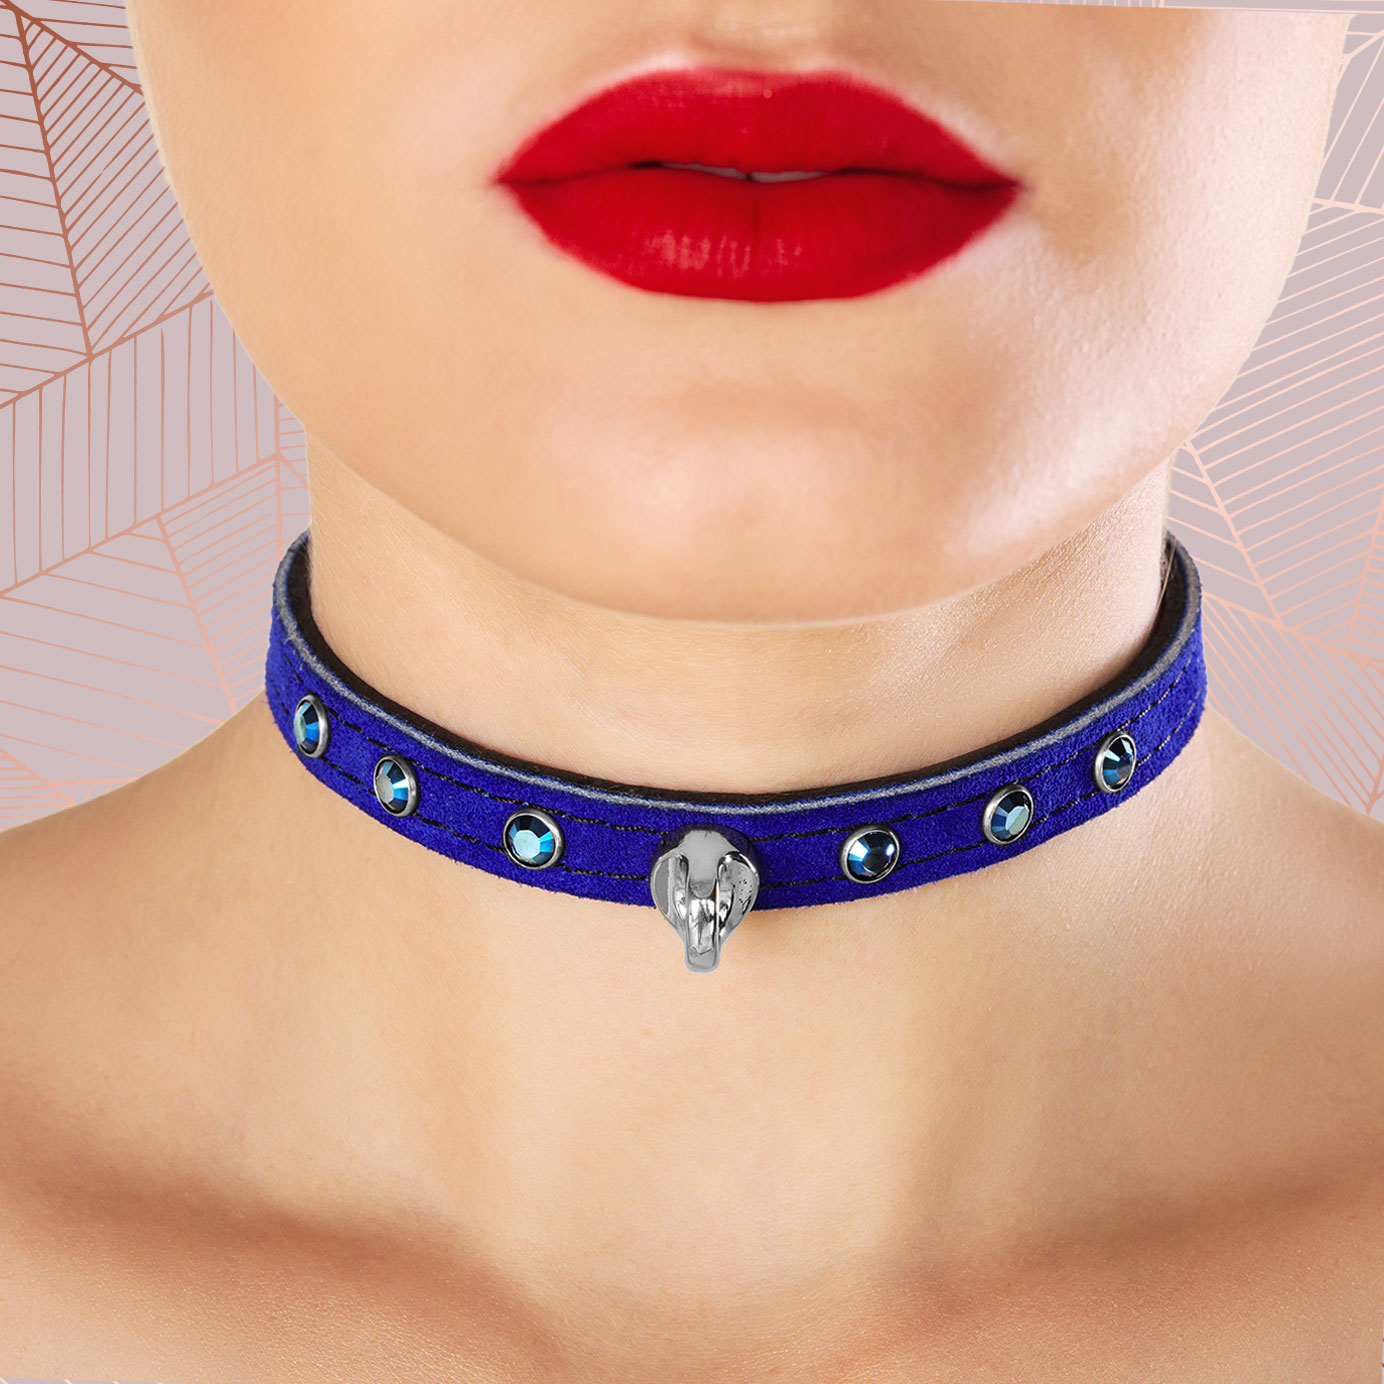 Luxury Suede BDSM Day collar Silver Hardware on Model Front